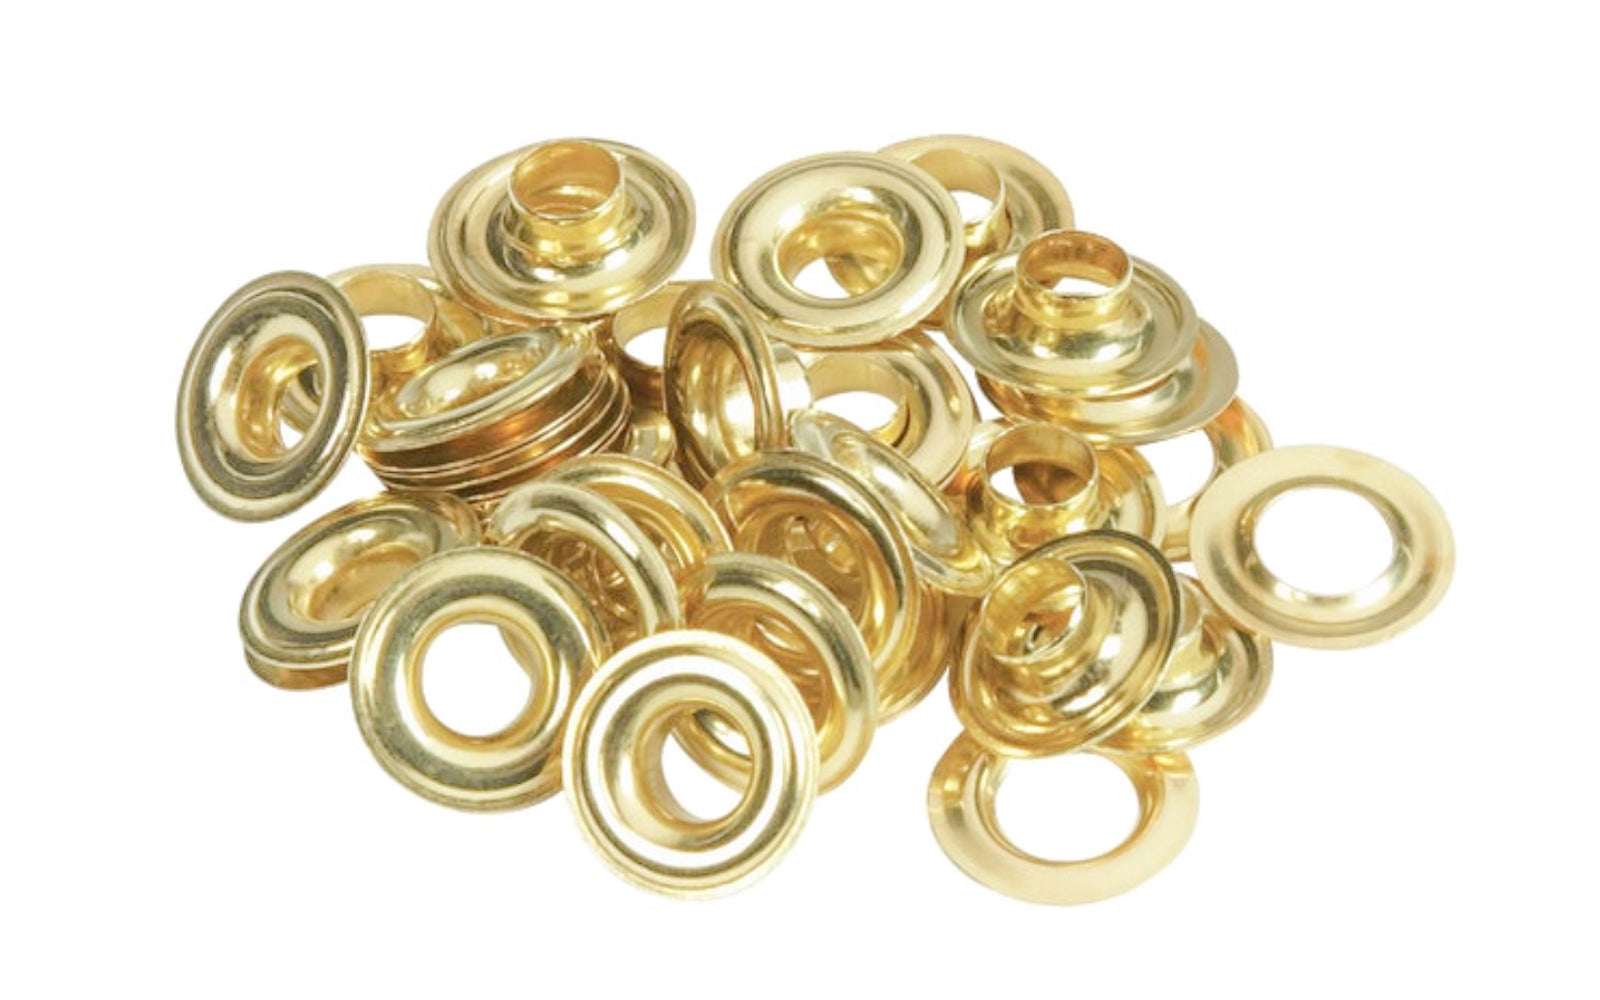 Lord & Hodge 1/4" Brass Grommets - 24 Sets. 1/4" Brass Grommet refills for replacement or repairs in canvas or plastic. Great for vinyl & canvas, tents, sails, covers for boats, trailers, pools, flags & banners, etc. 1/4" inside diameter grommets. Made by Lord and Hodge, Inc. Model 1074-0. Made in USA.